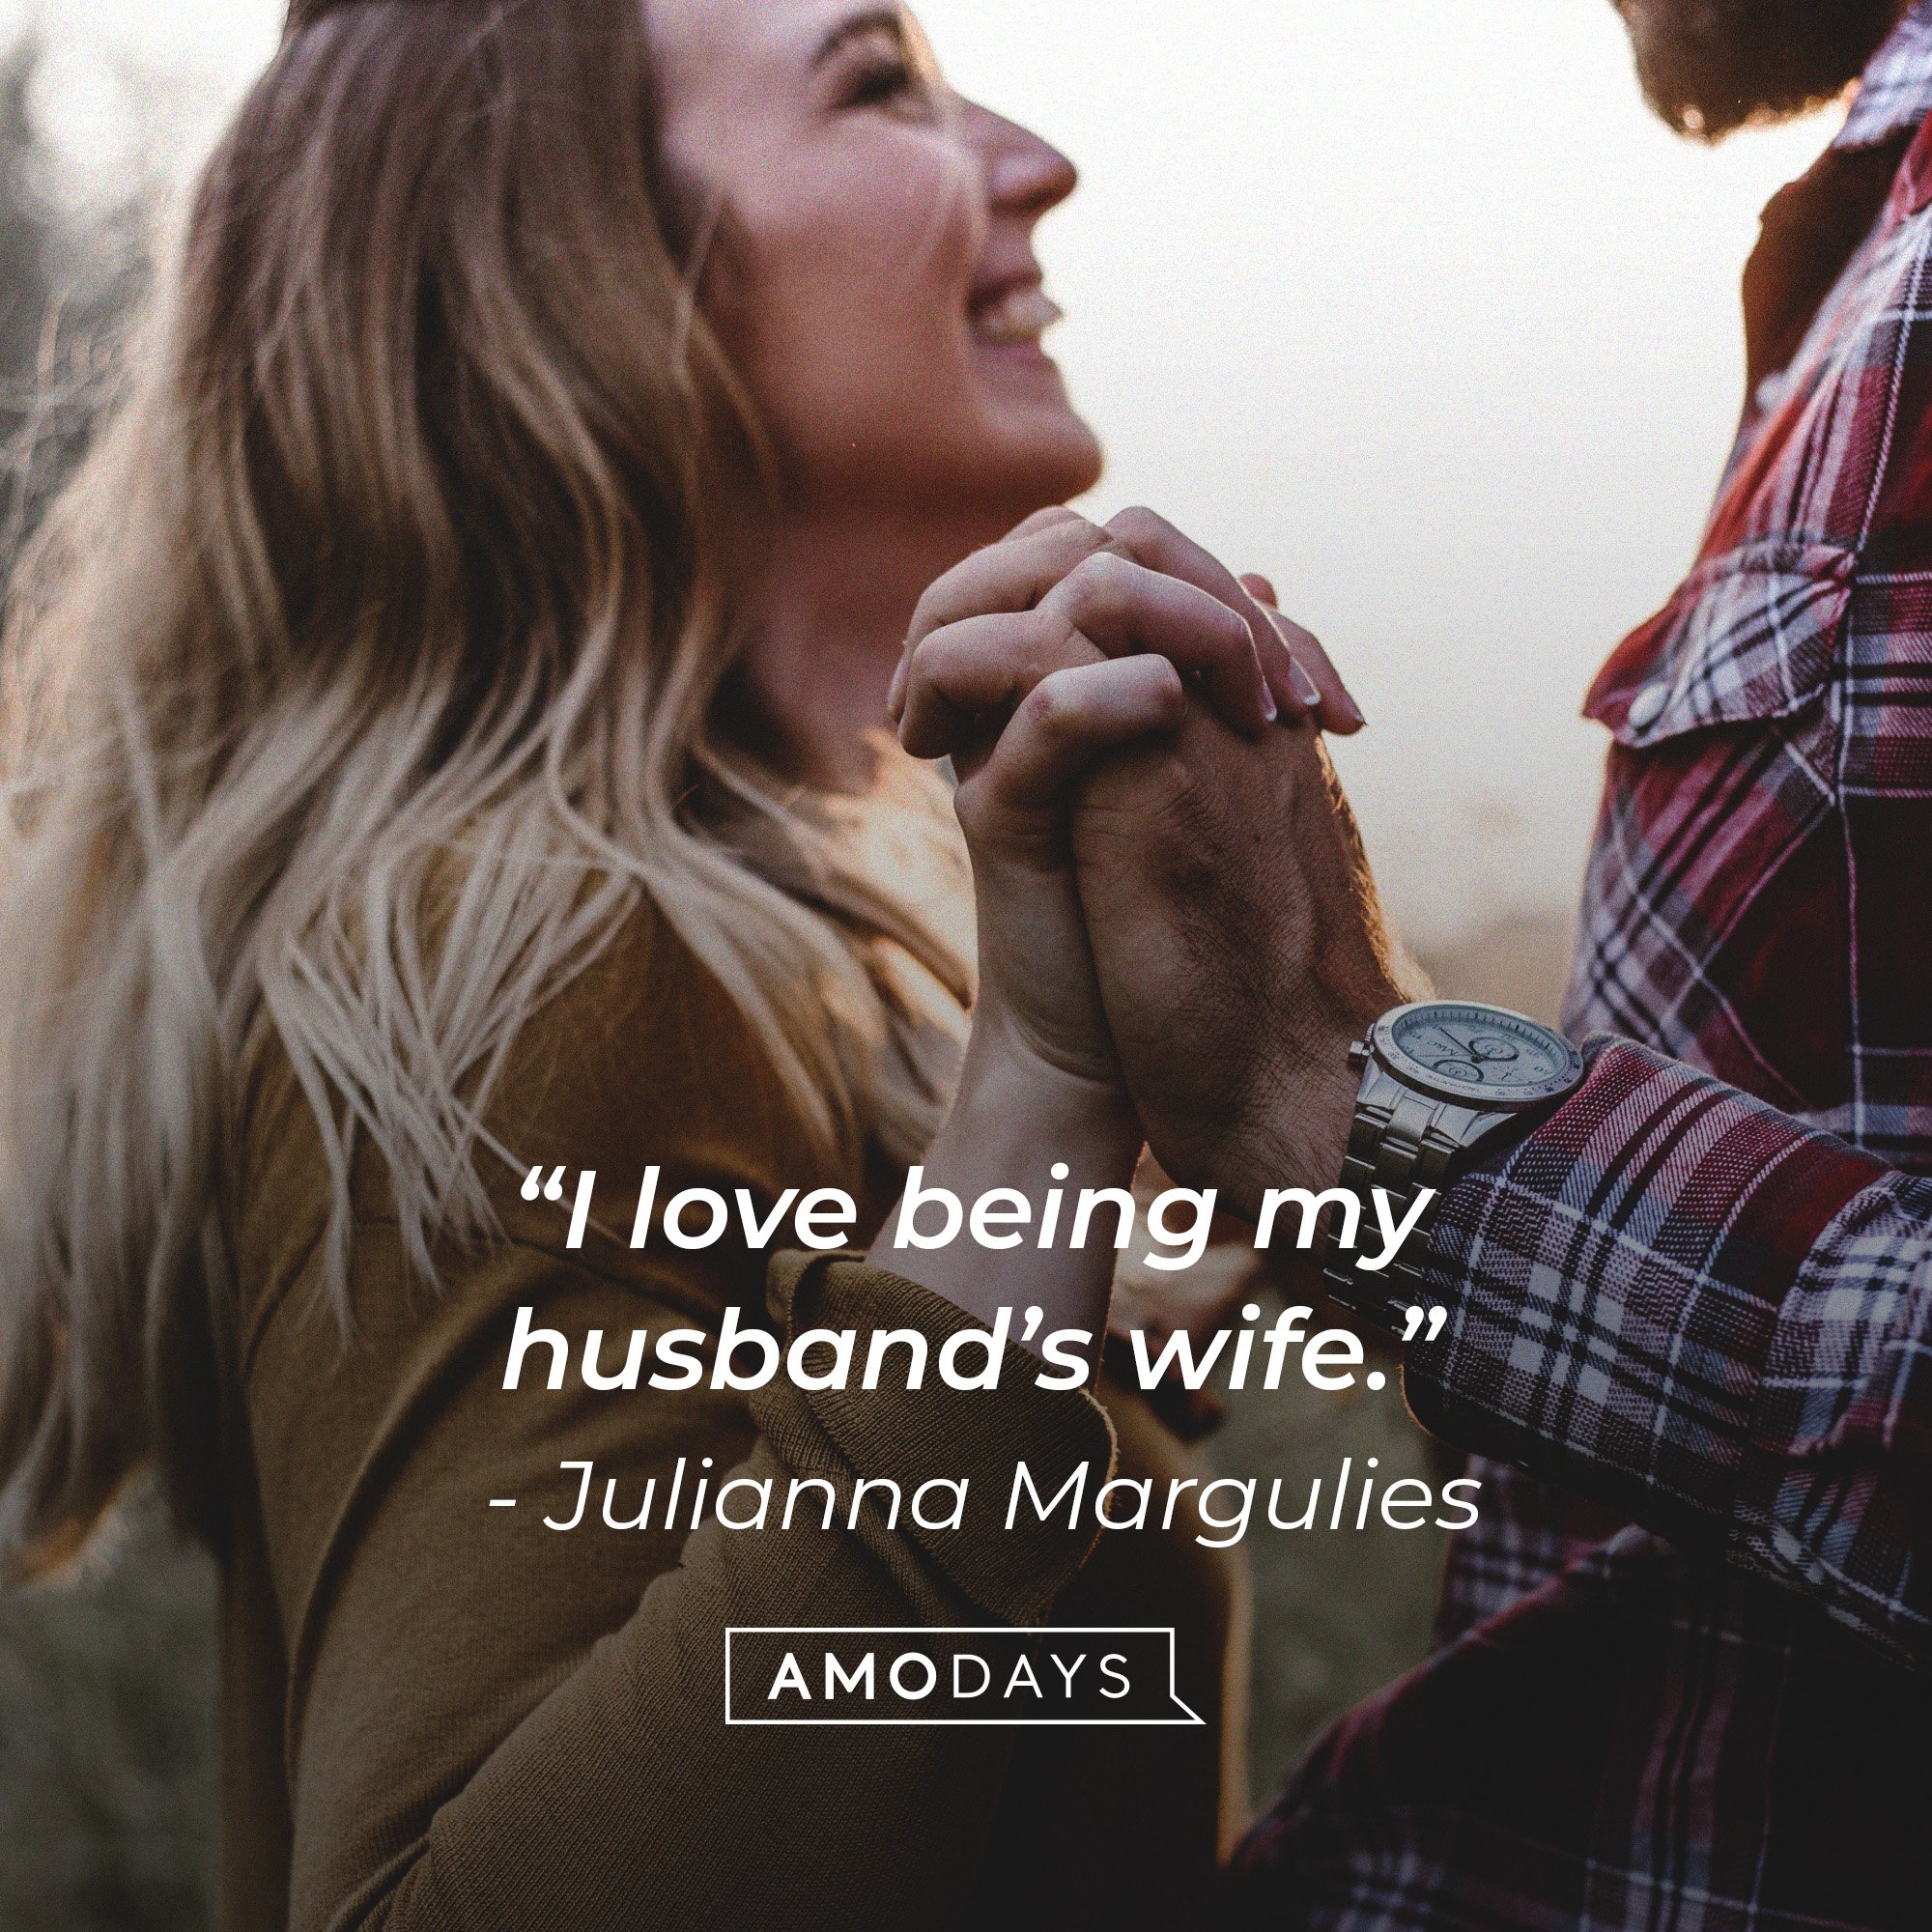  Julianna Margulies's quote: “I love being my husband’s wife.” | Image: AmoDays